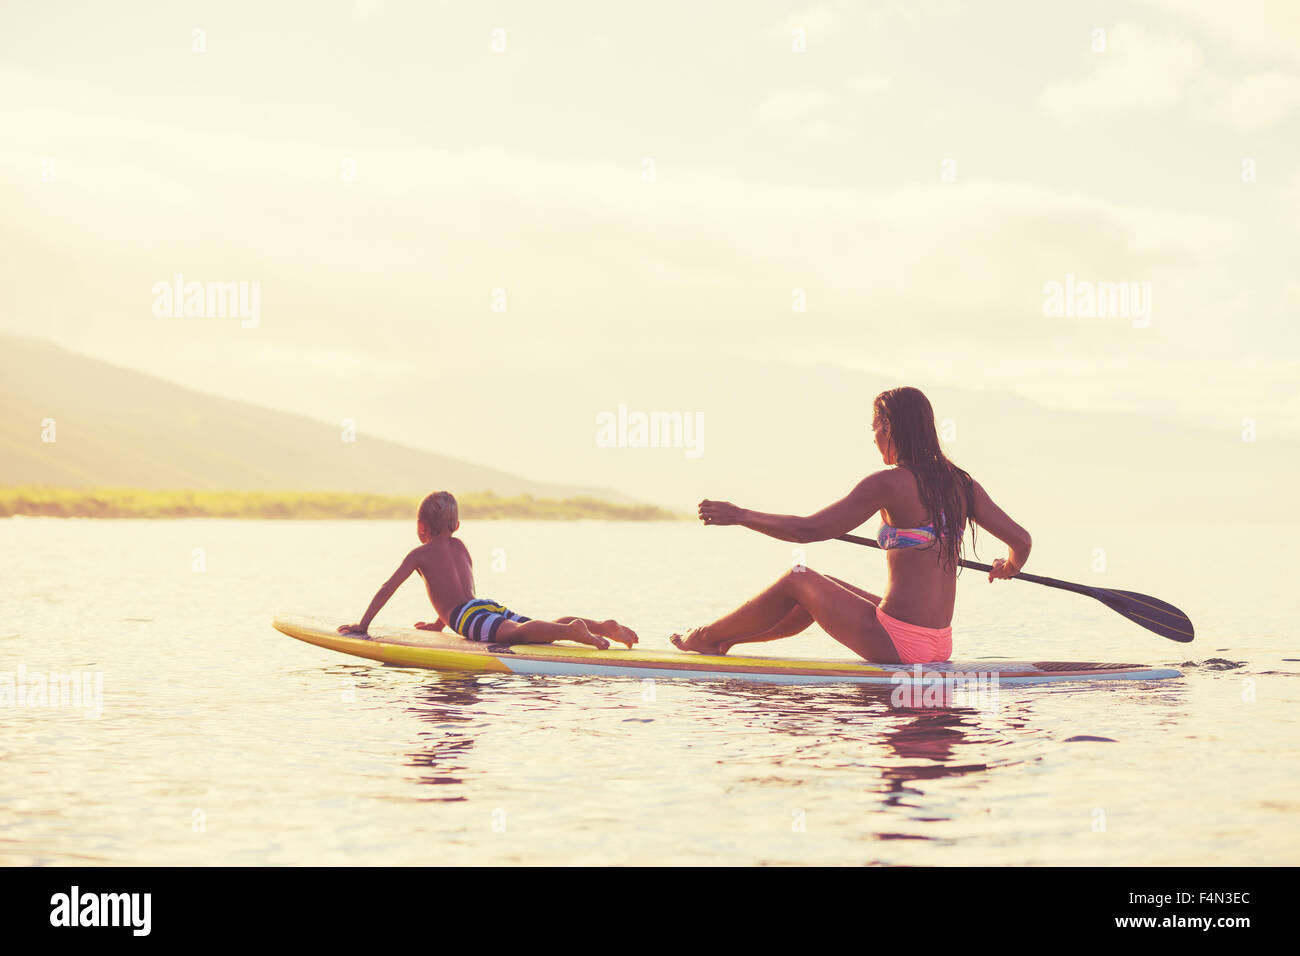 Mother and son stand up paddling at sunrise, Summer fun outdoor lifestyle Stock Photo